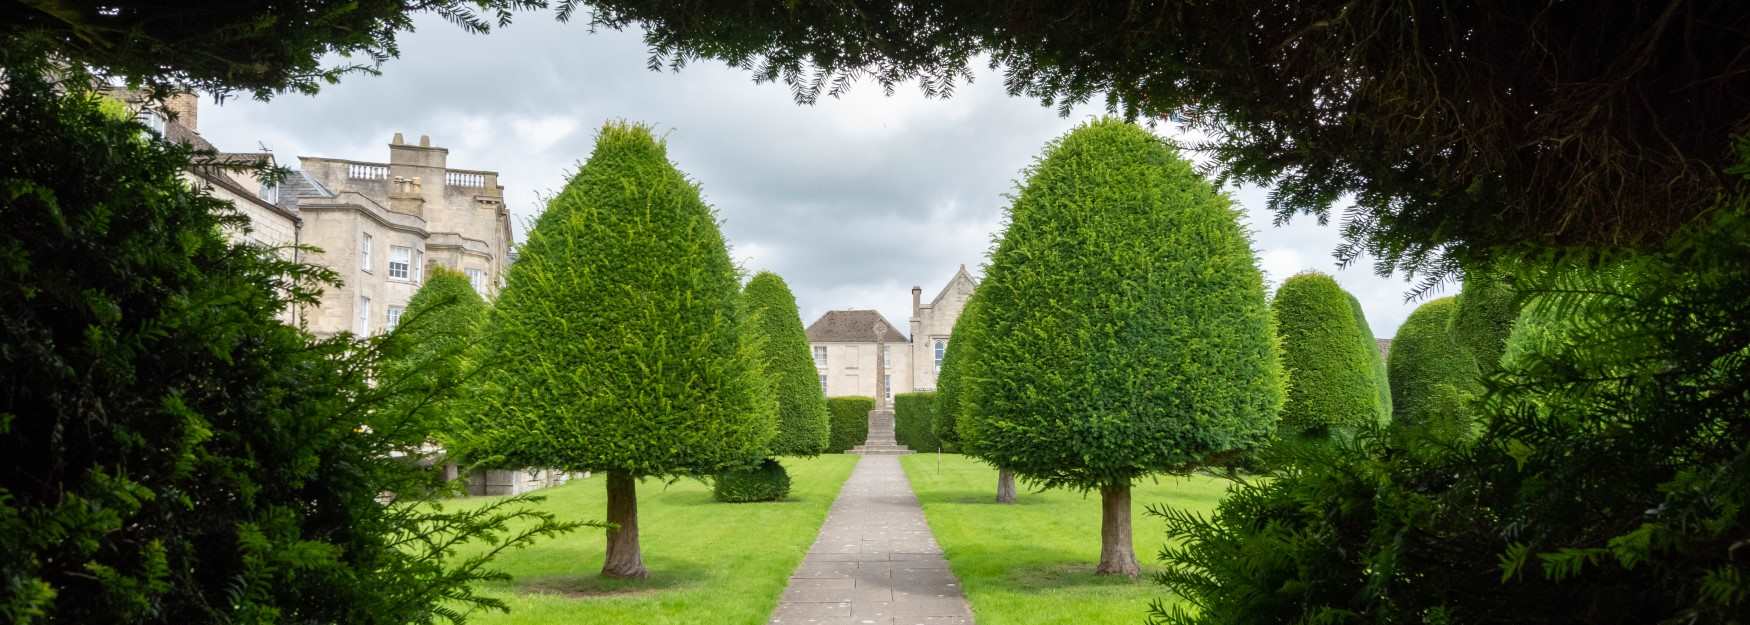 Yew trees in Painswick church's grounds